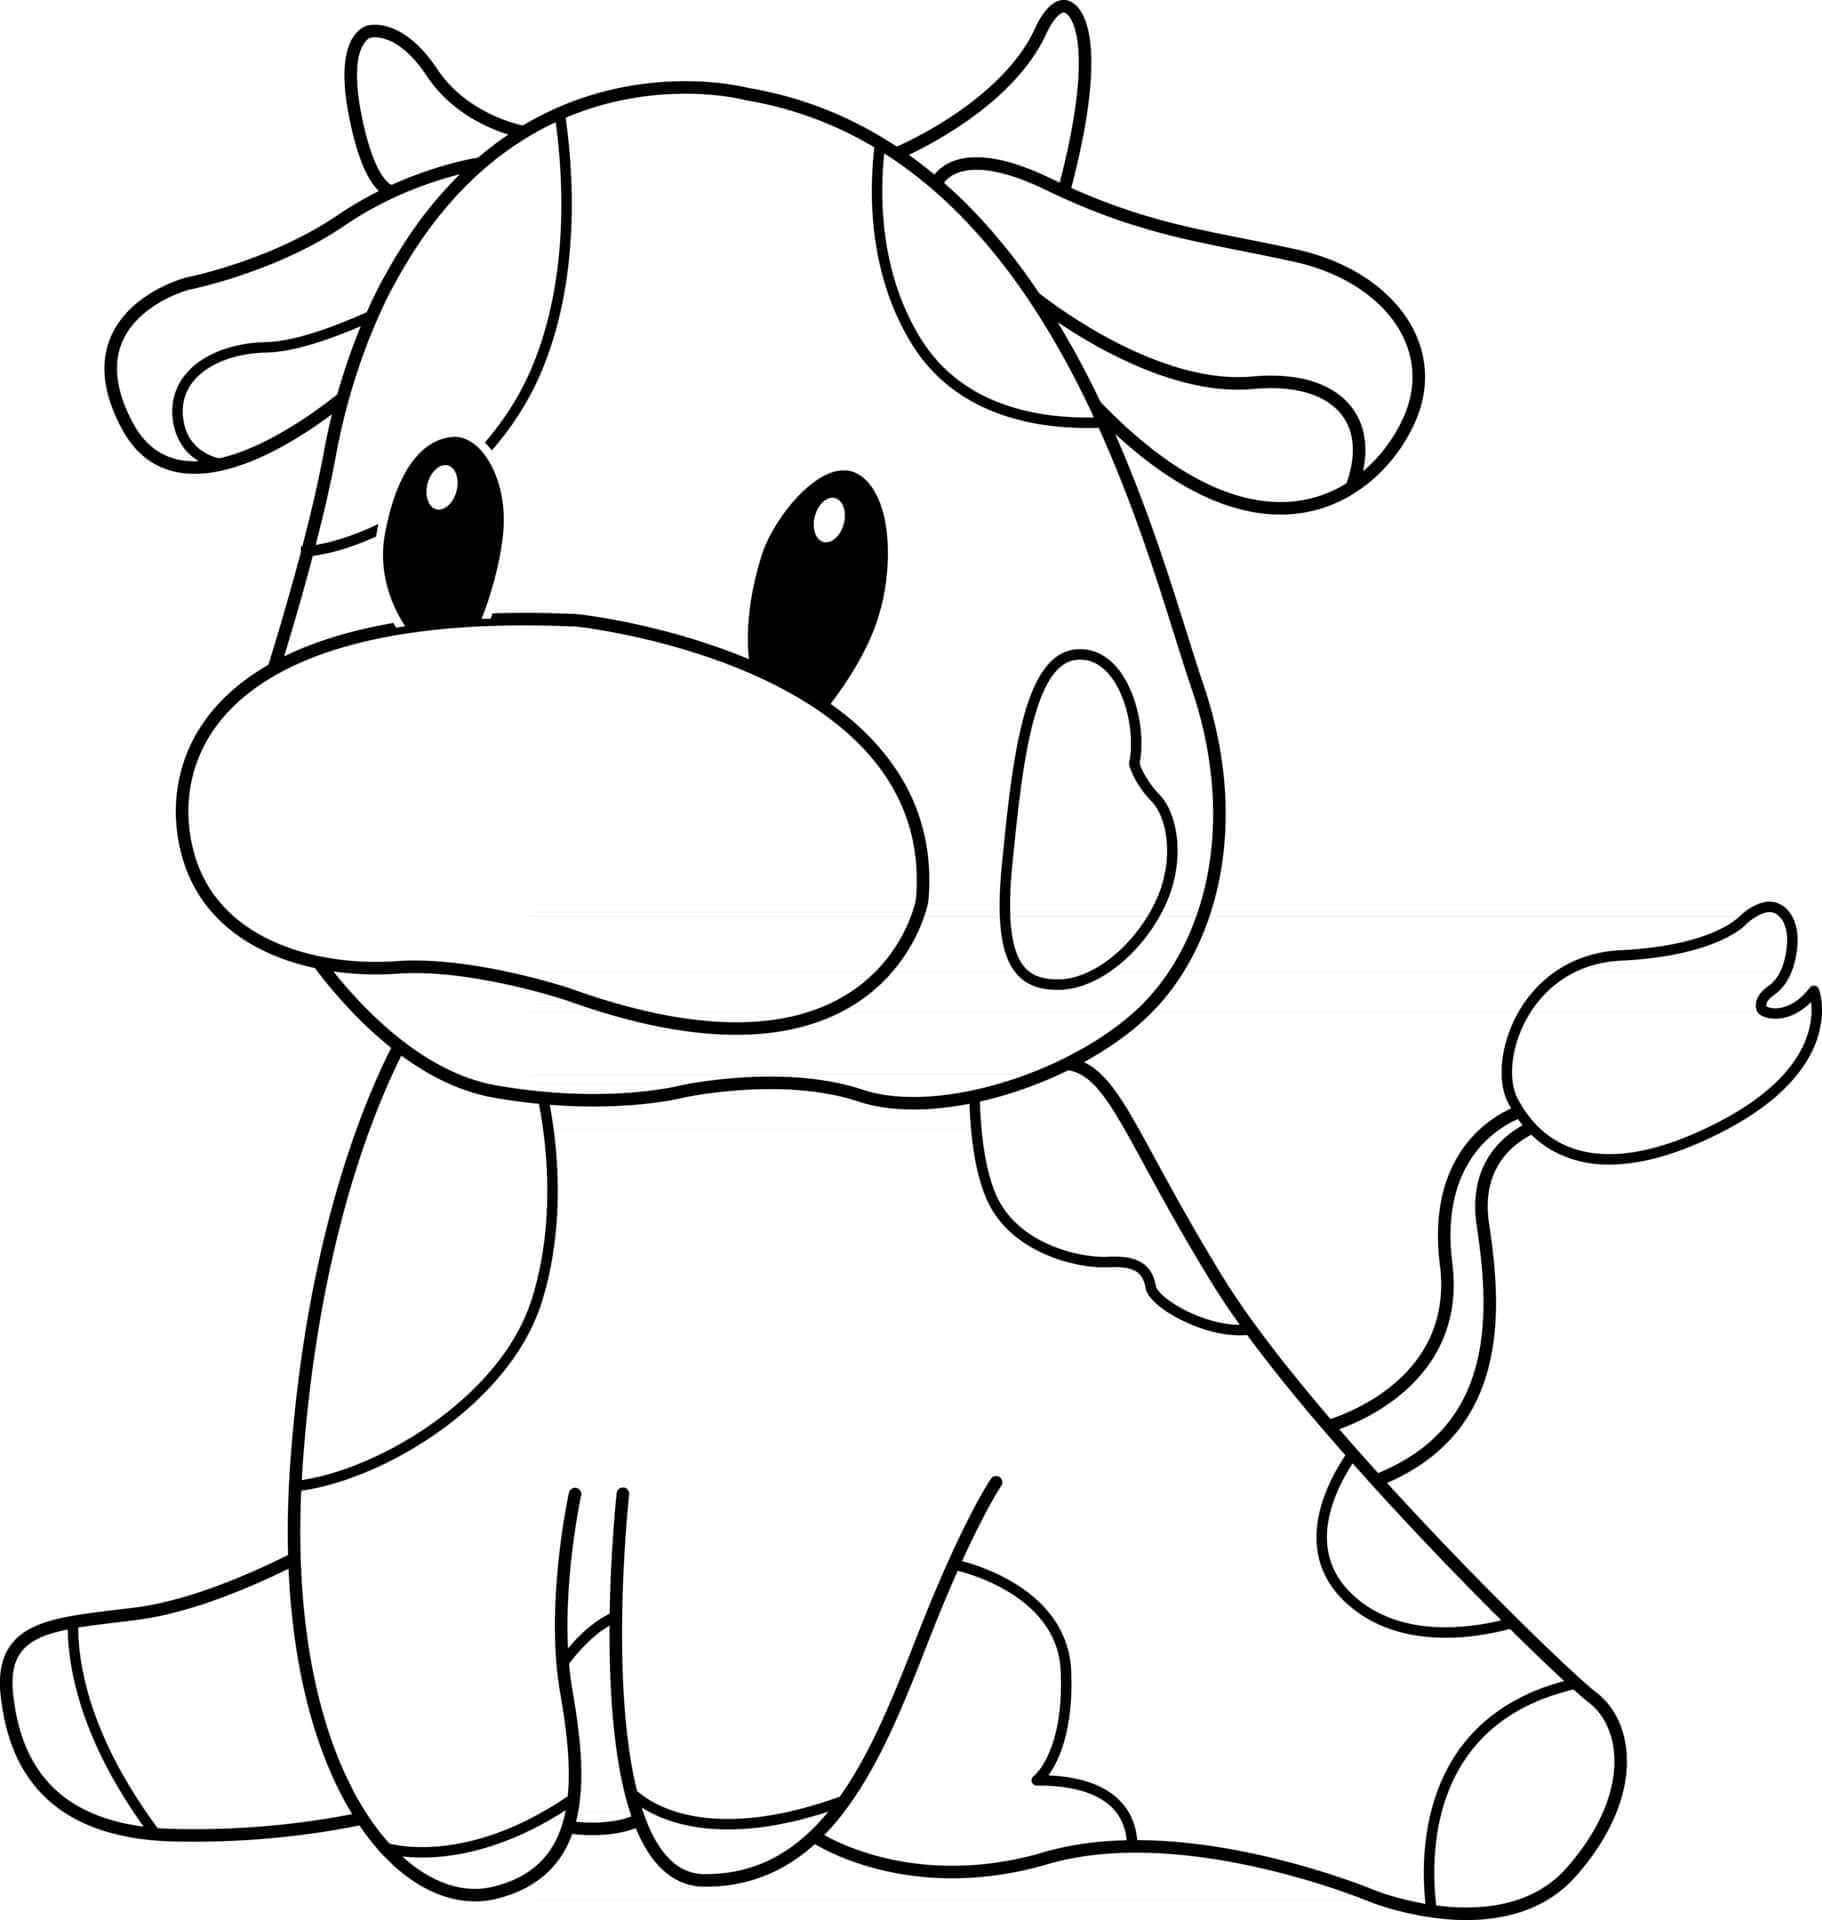 Cute Animal Coloring Pages   Coloring Cool